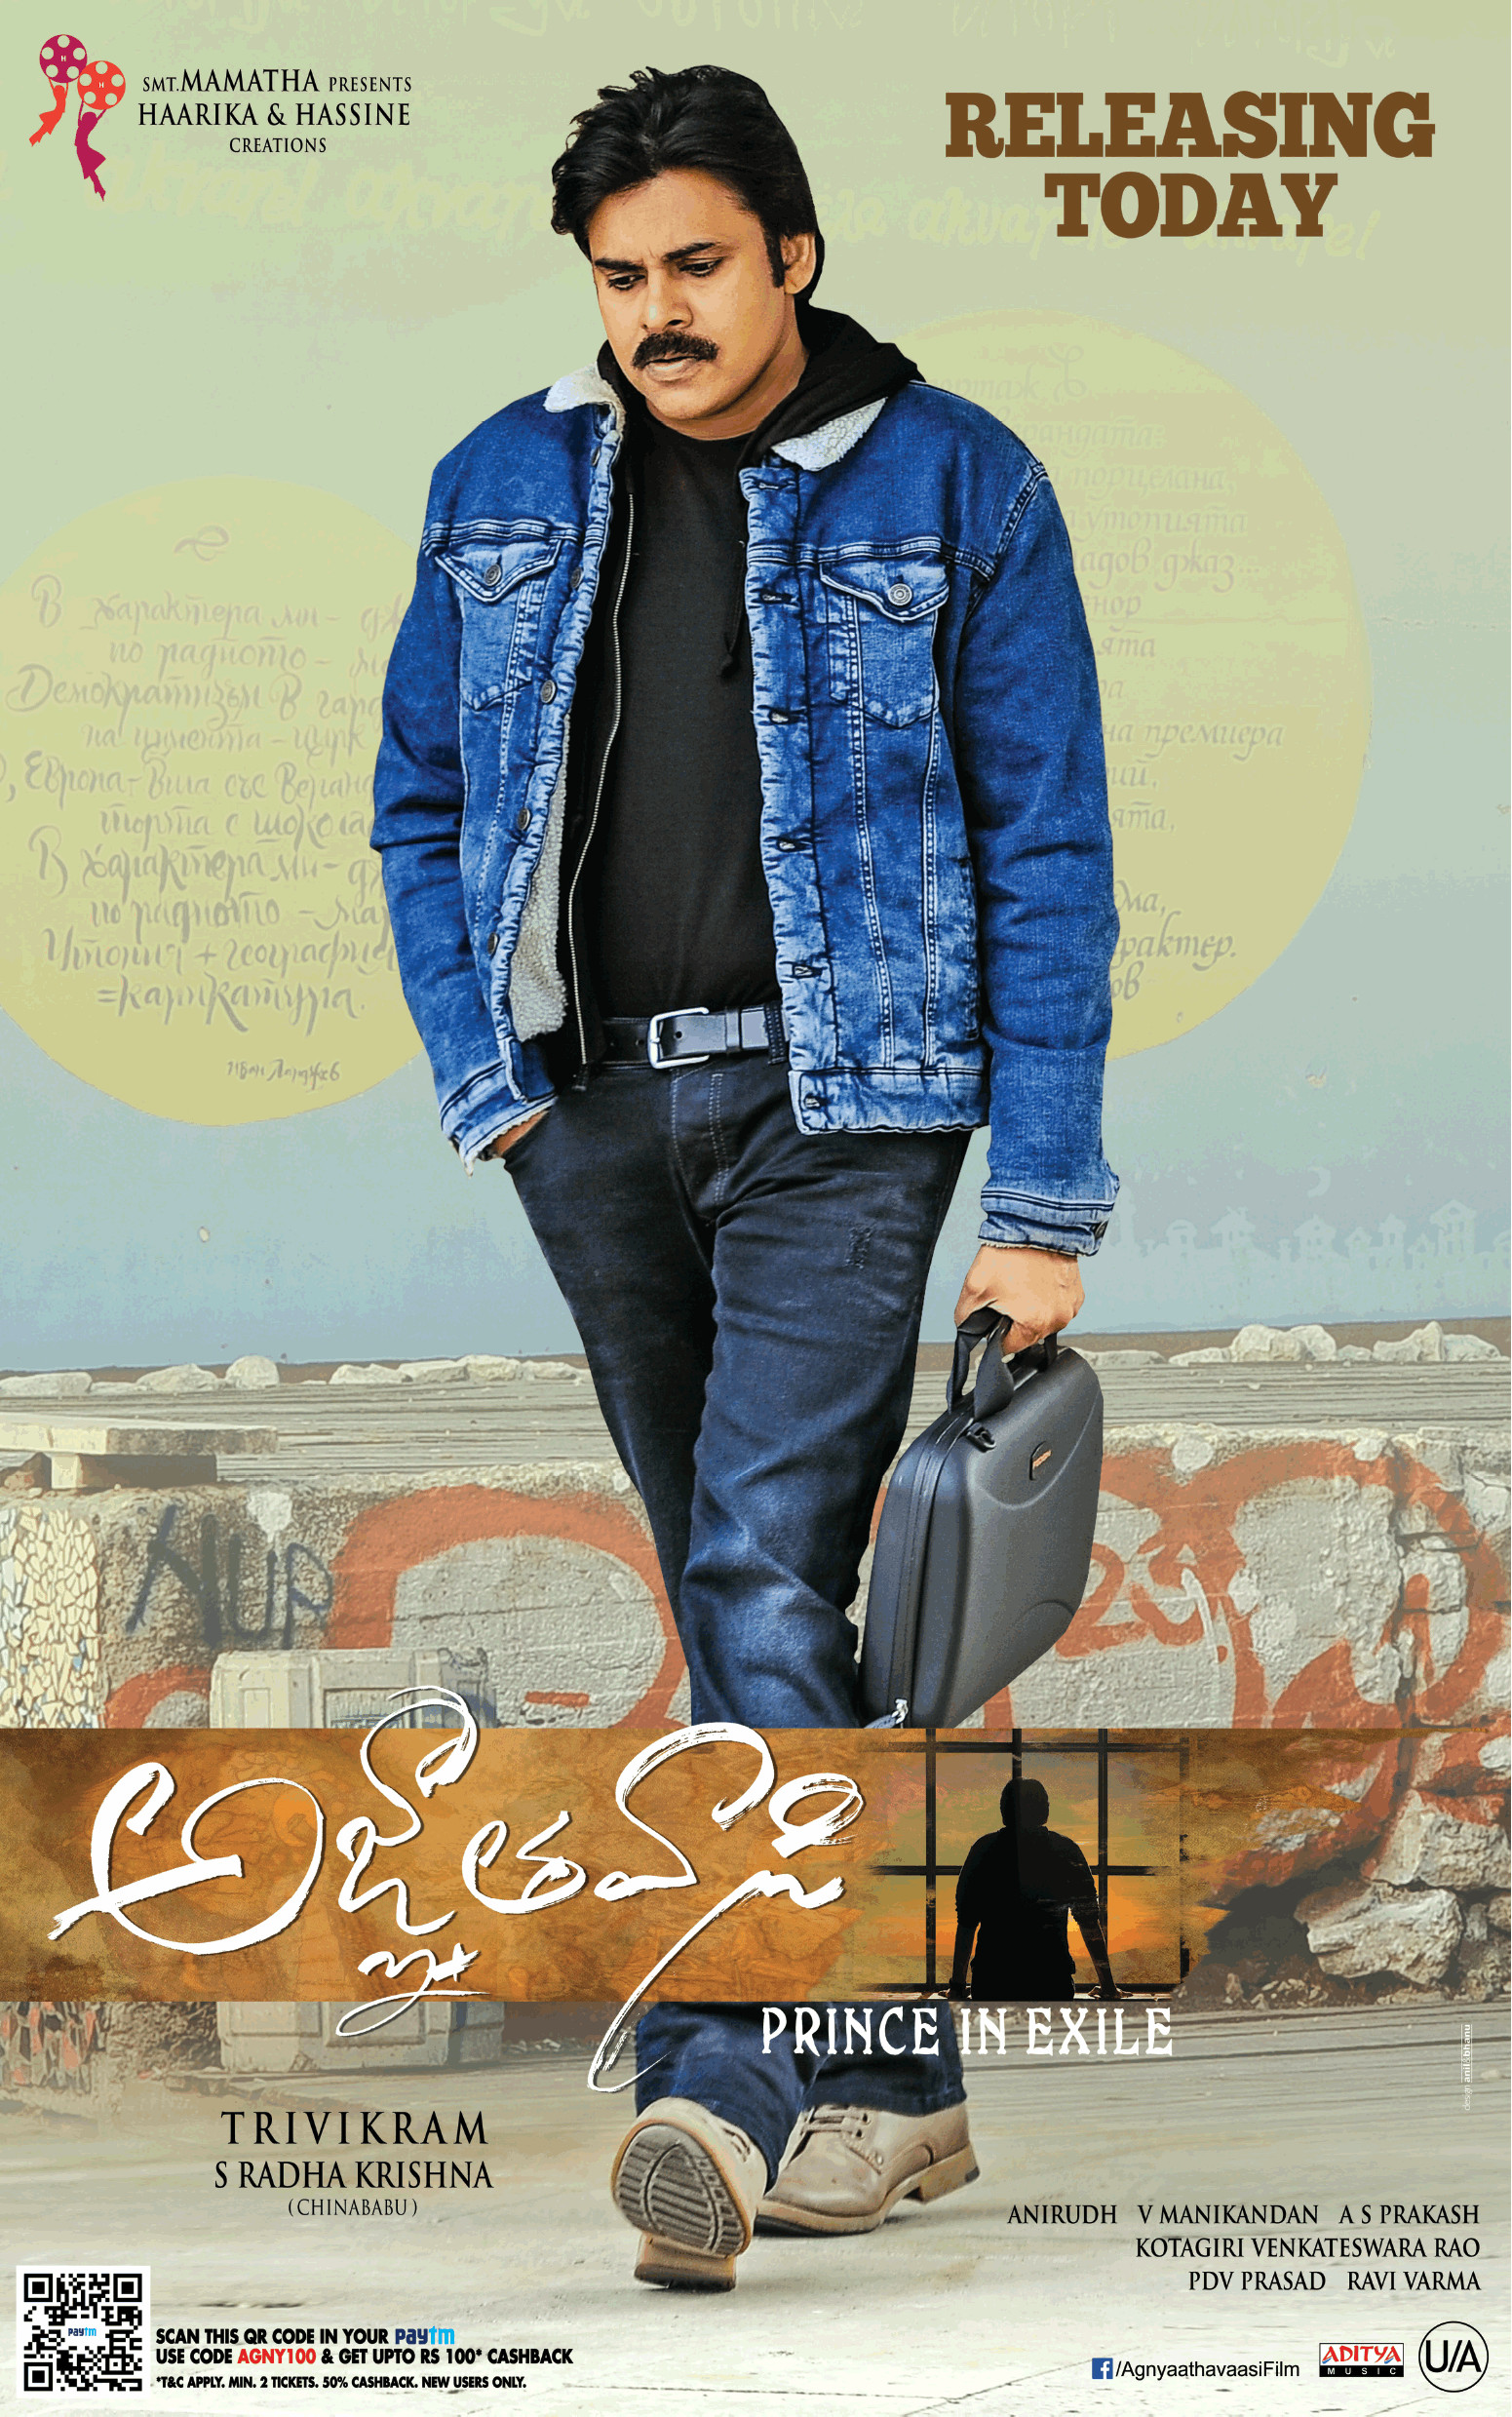 Agnyaathavaasi 2018. Released today.